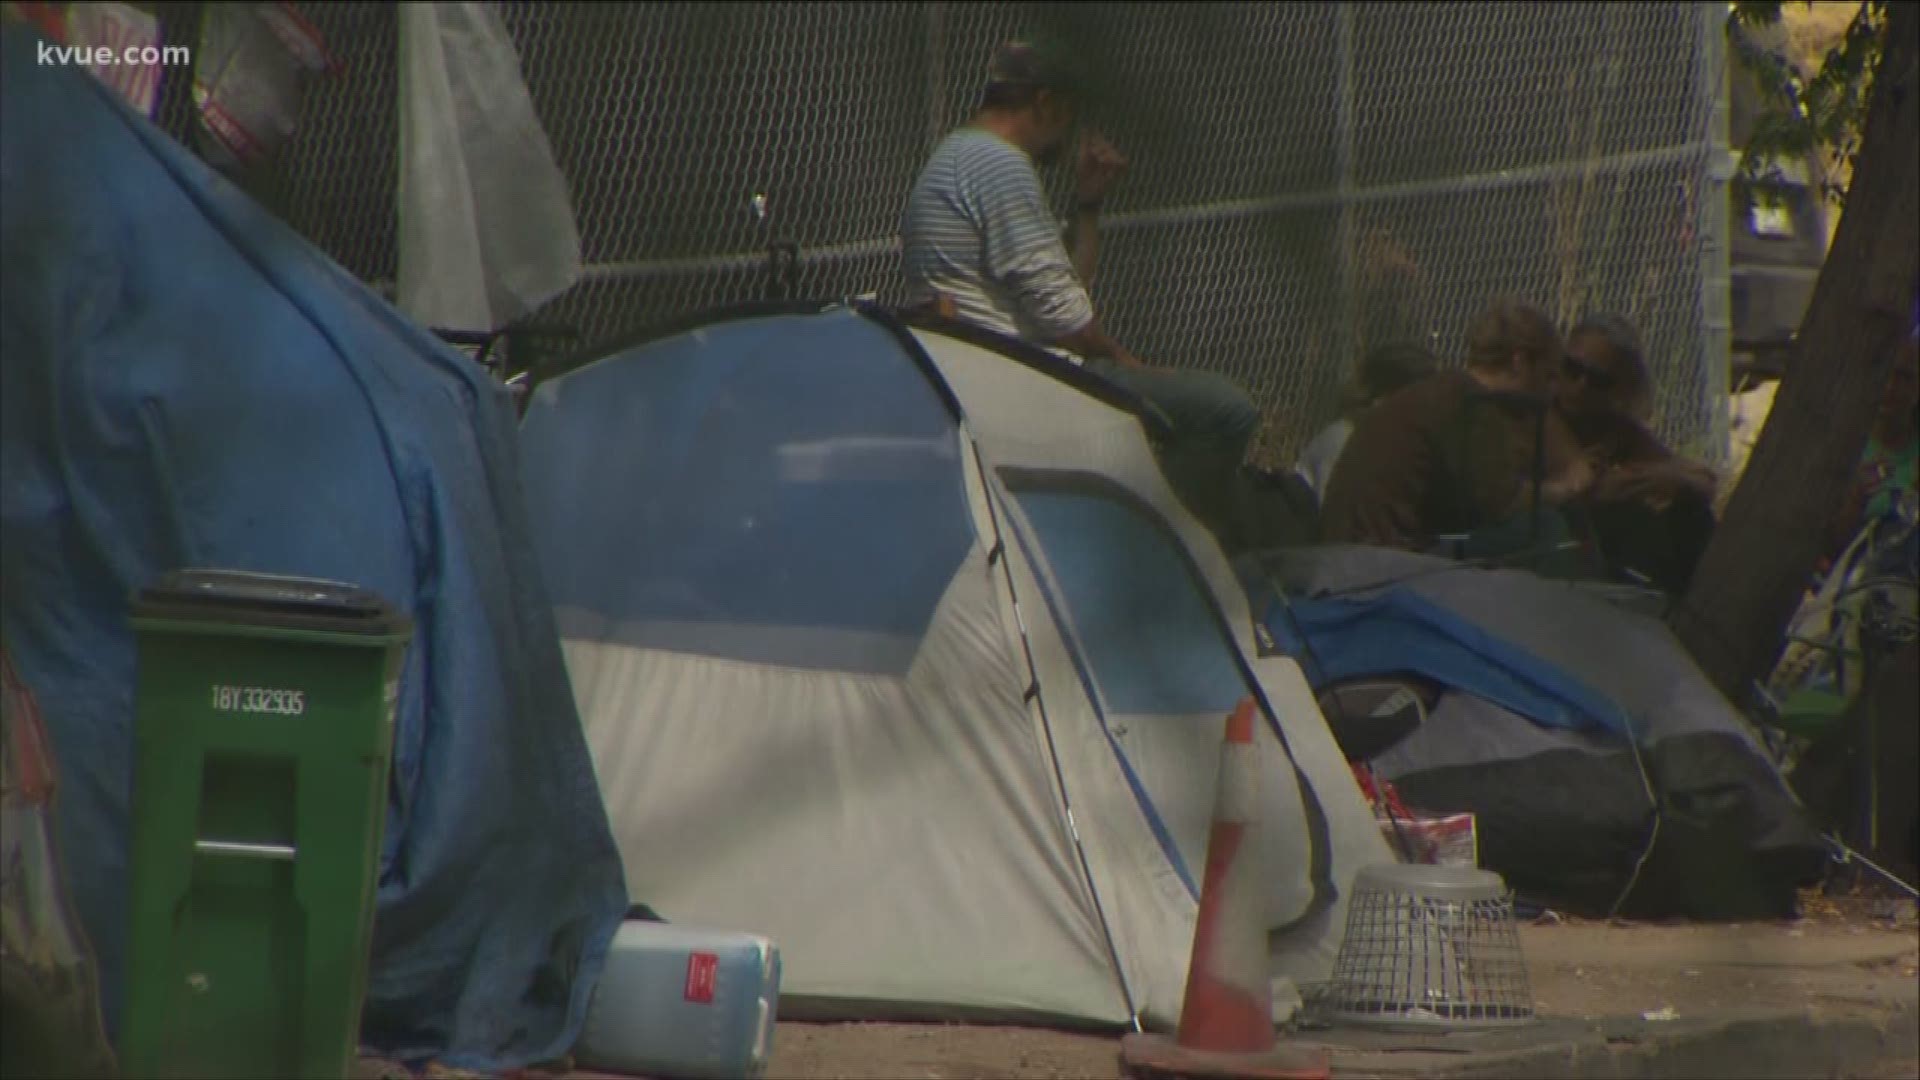 On Thursday, the governor called for the City to reinstate the camping ban and said the City is dedicating more than $20,000 for each homeless person.